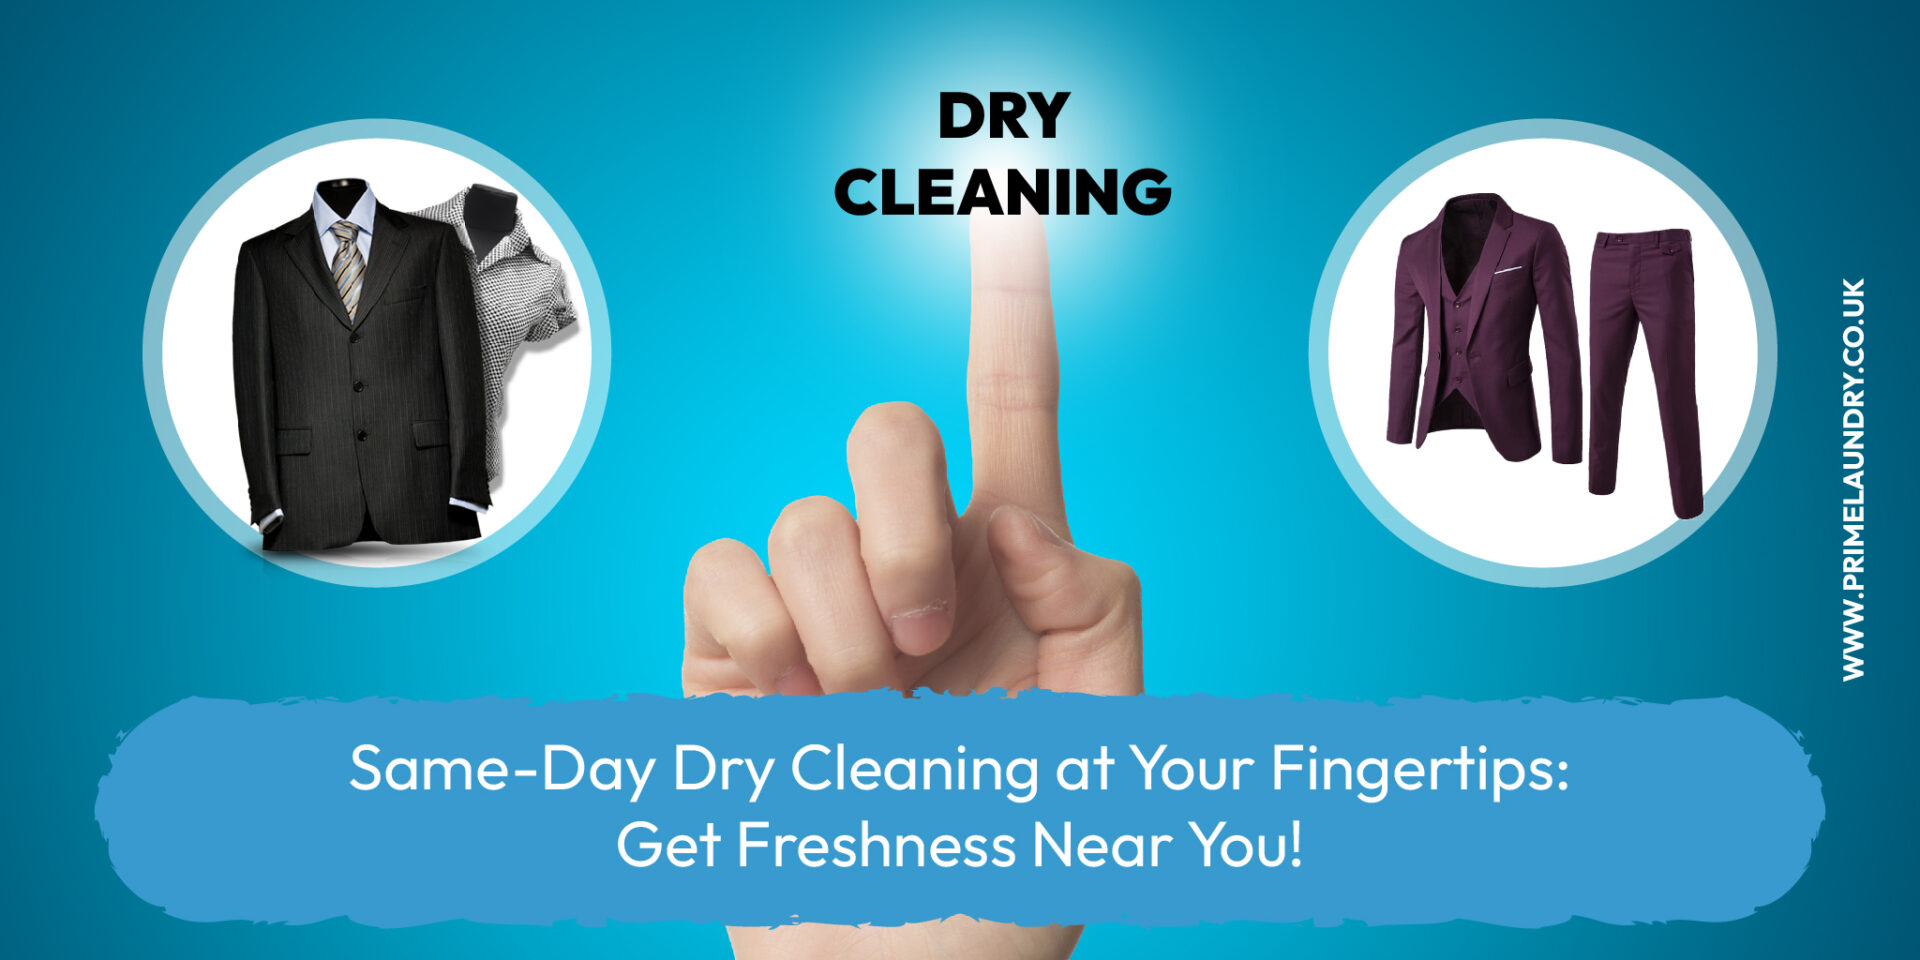 Same-Day Dry Cleaning at Your Fingertips: Get Freshness Near You!